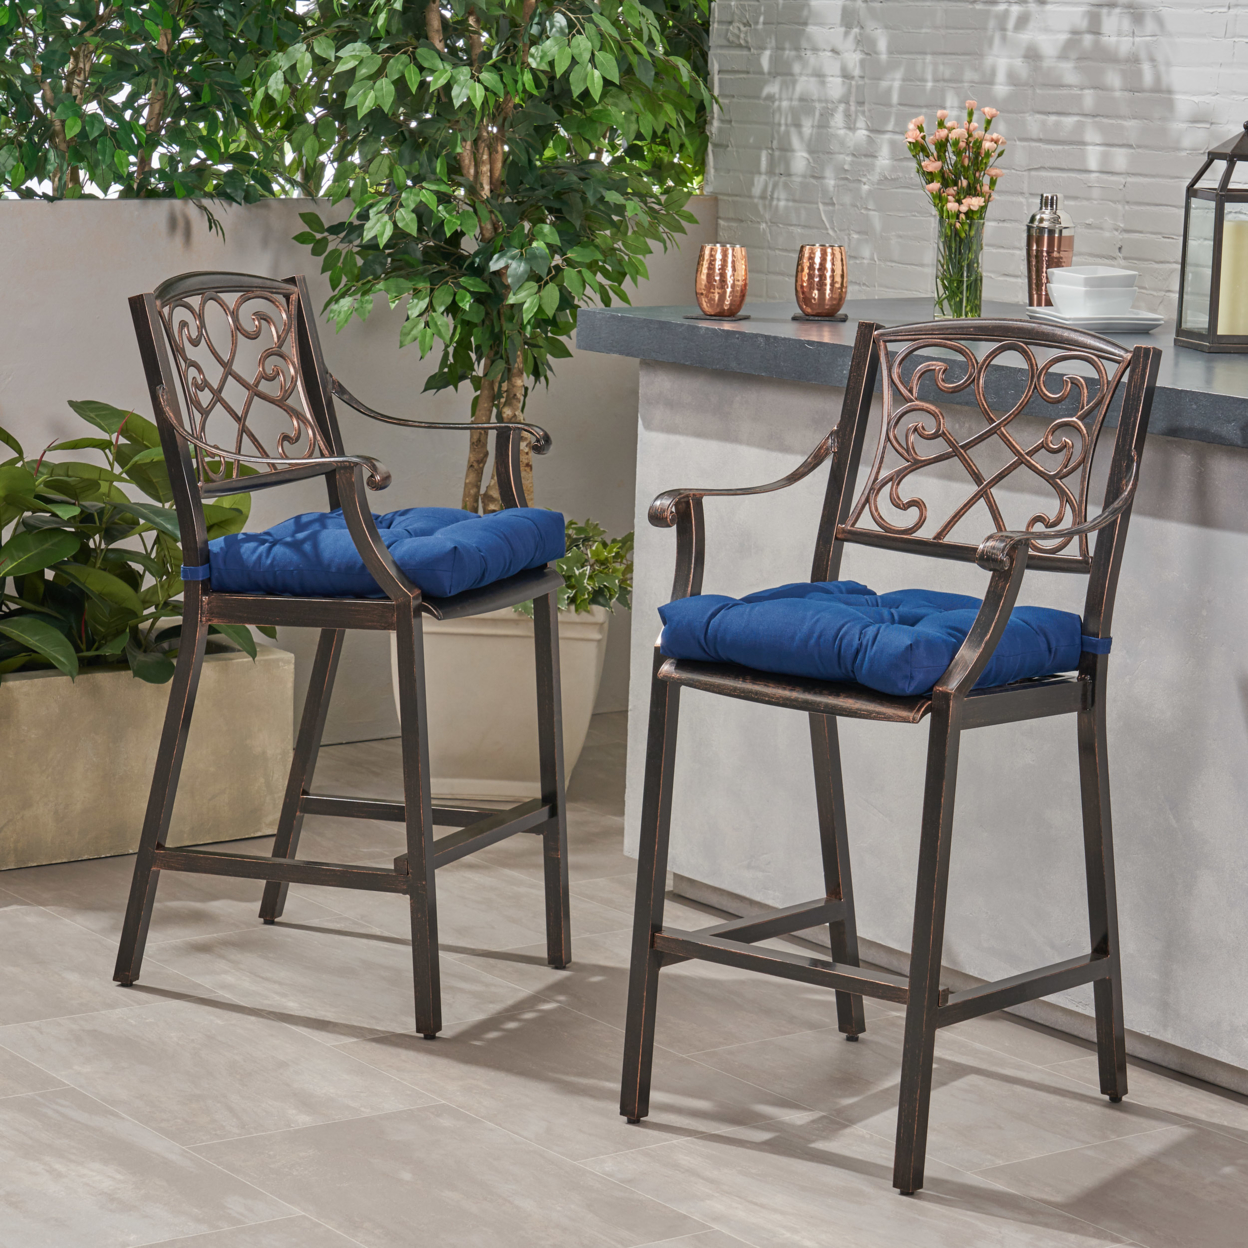 Megan Outdoor Barstool With Cushion (Set Of 2) - Shiny Copper + Teal